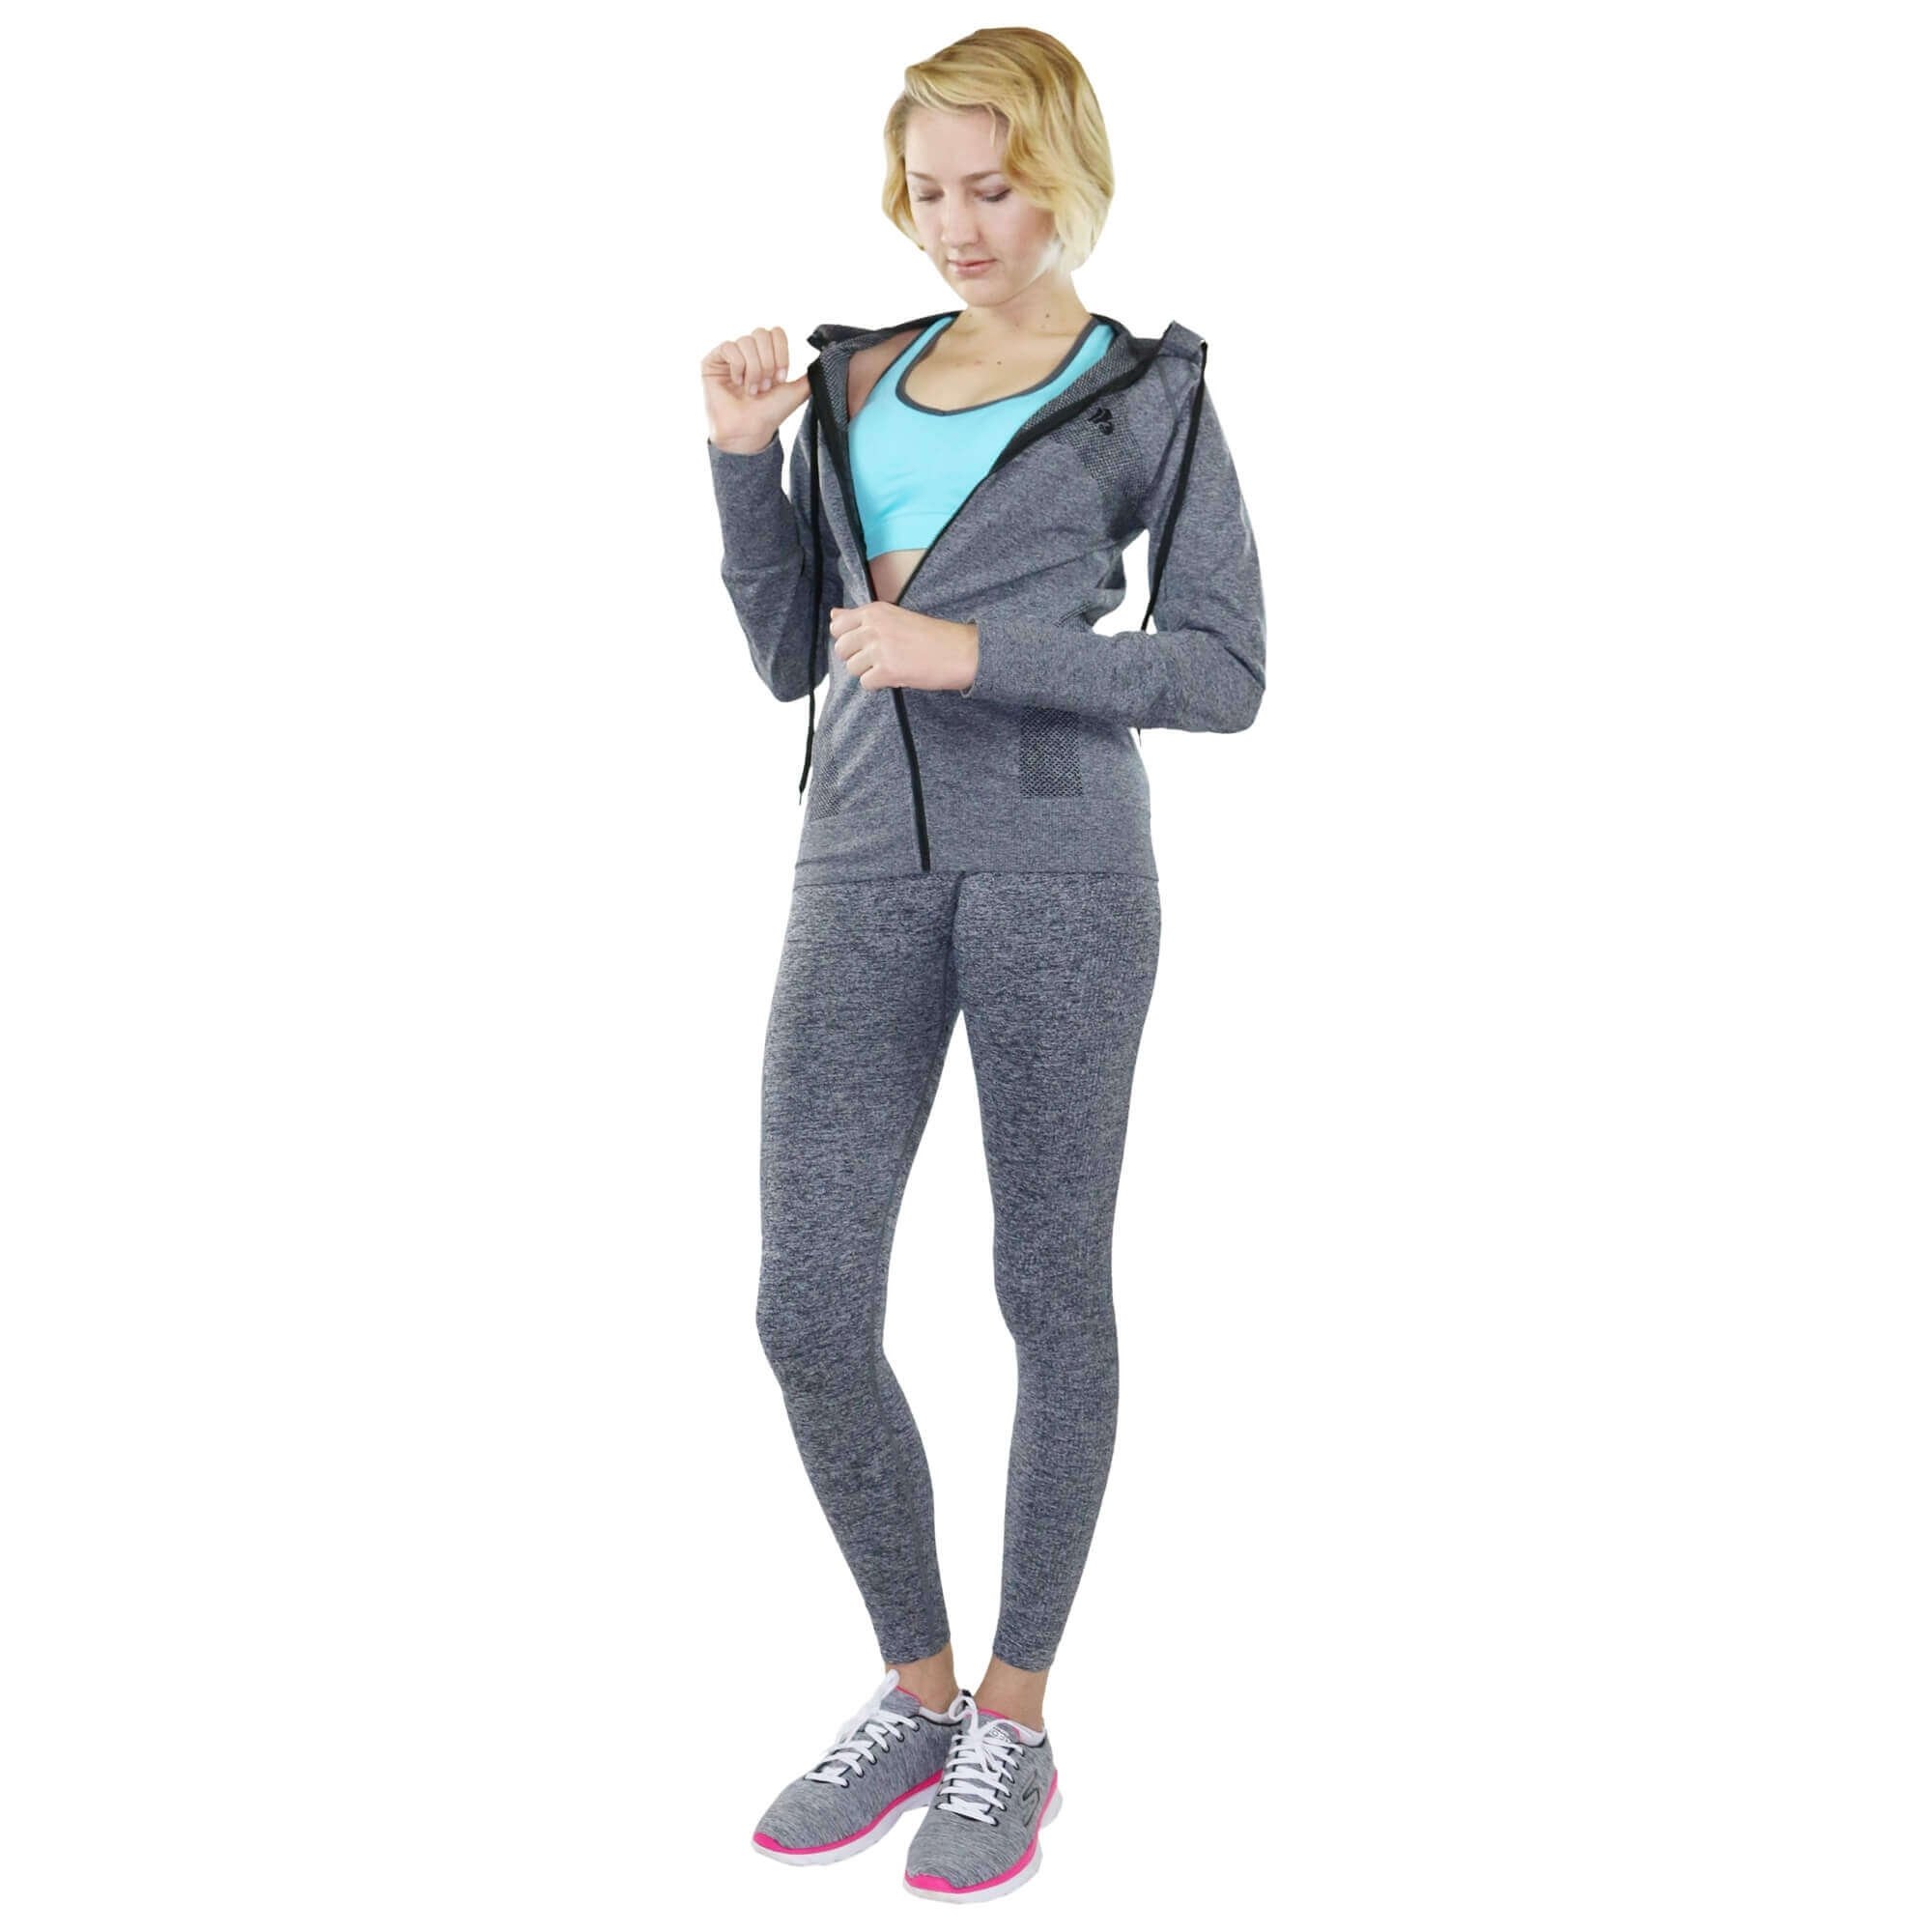 Fitcue Women's Full Zip Workout Hoodie - Click Image to Close